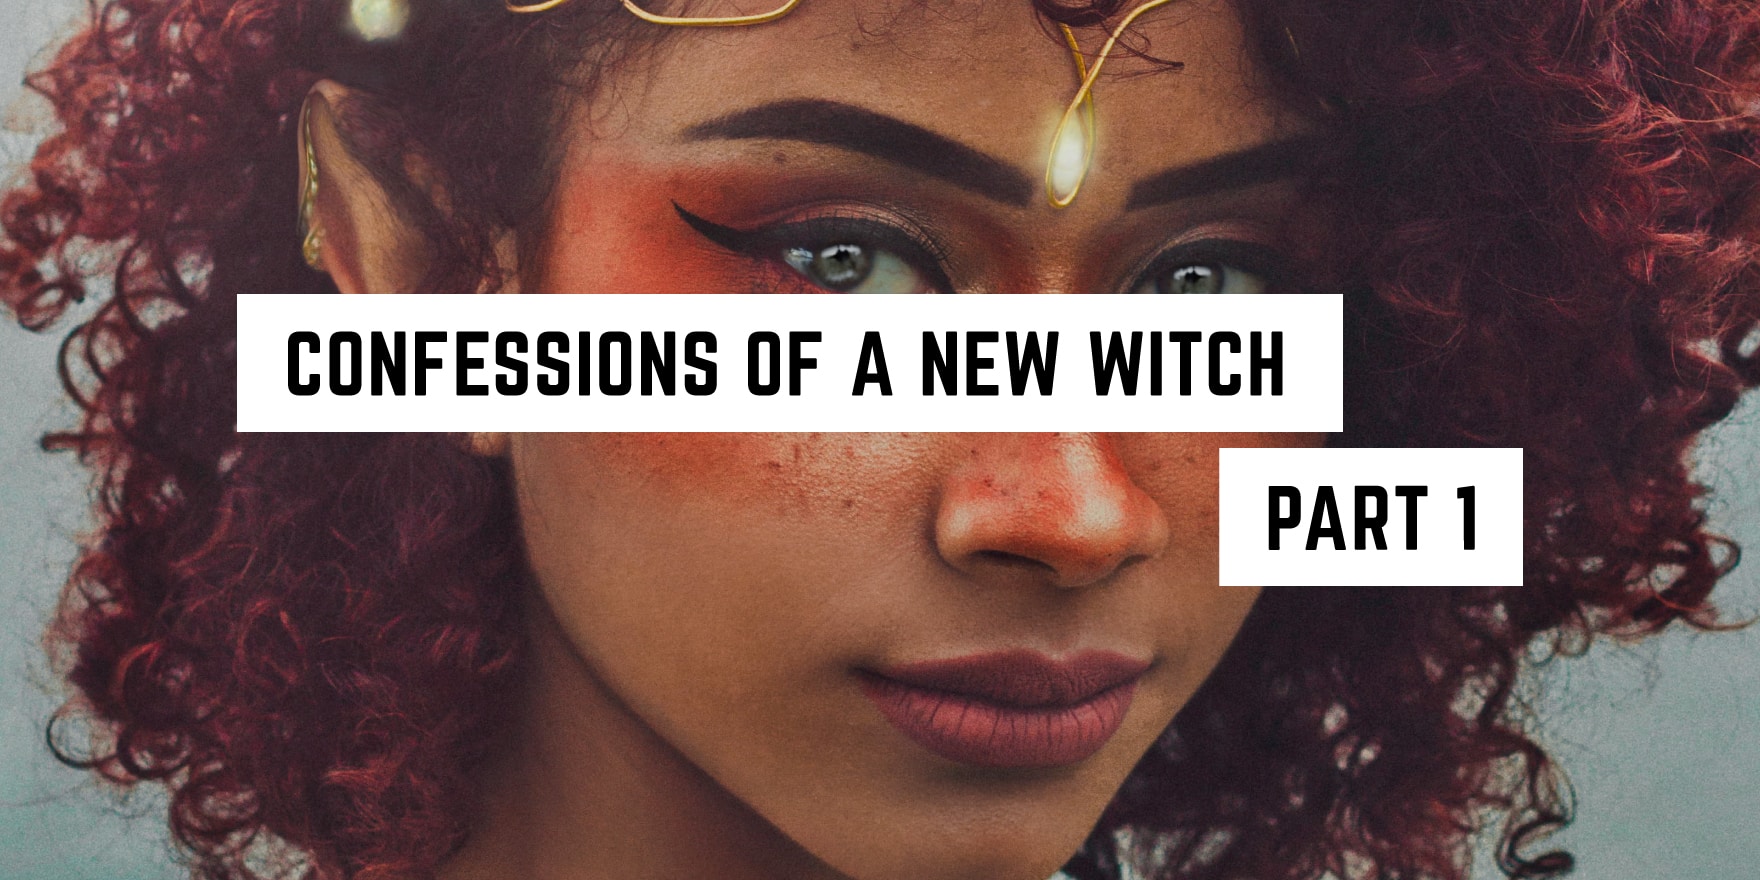 A mystical ambiance with a tale to tell: "confessions of a new witch - part 1" exudes a witchy spiritual essence.